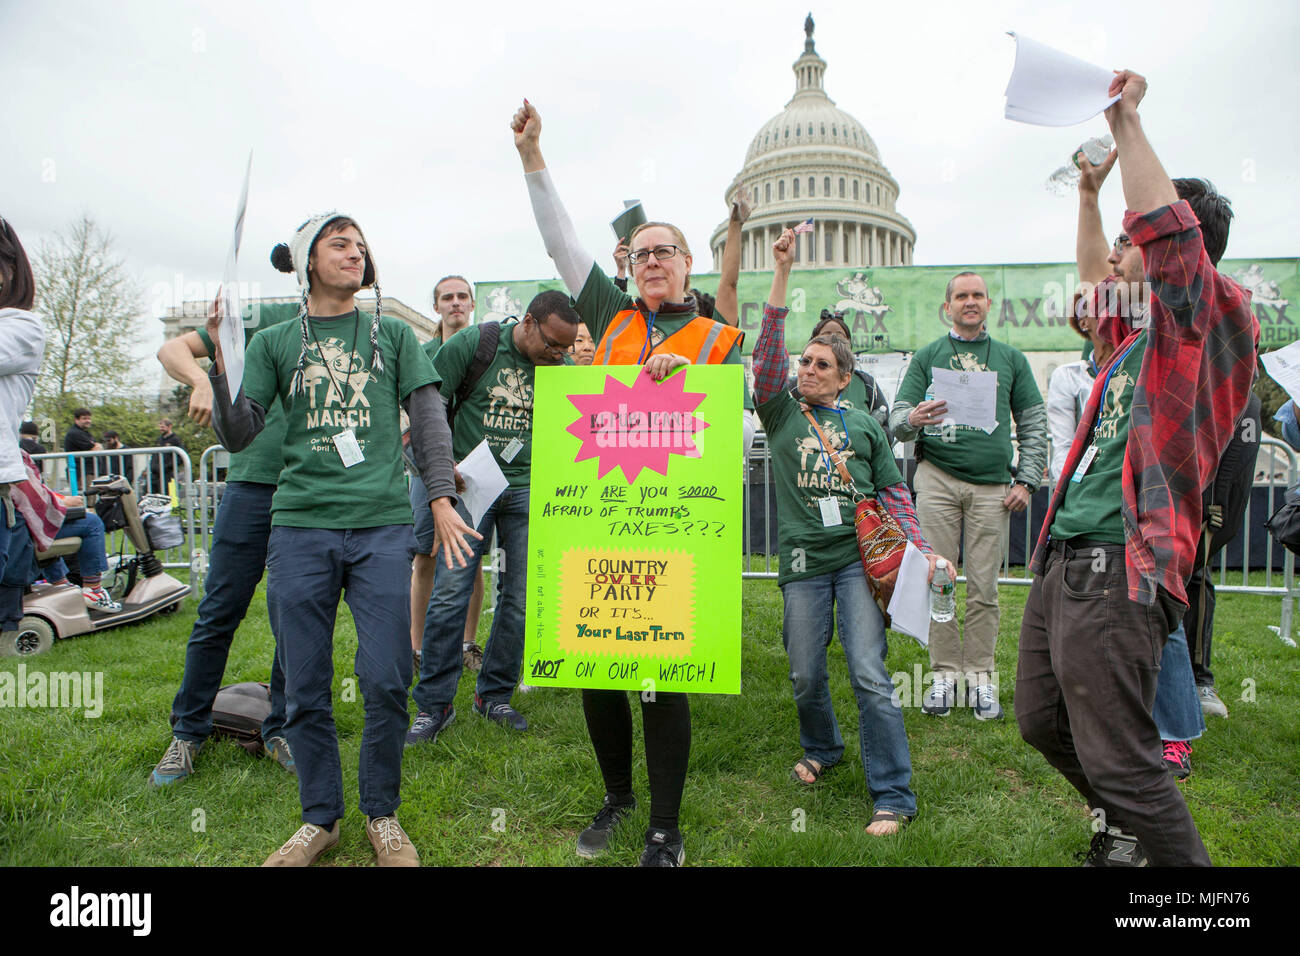 during the Tax March, an effort to encourage President Donald Trump to release his taxes in Washington, D.C. on April 15th, 2017. Stock Photo